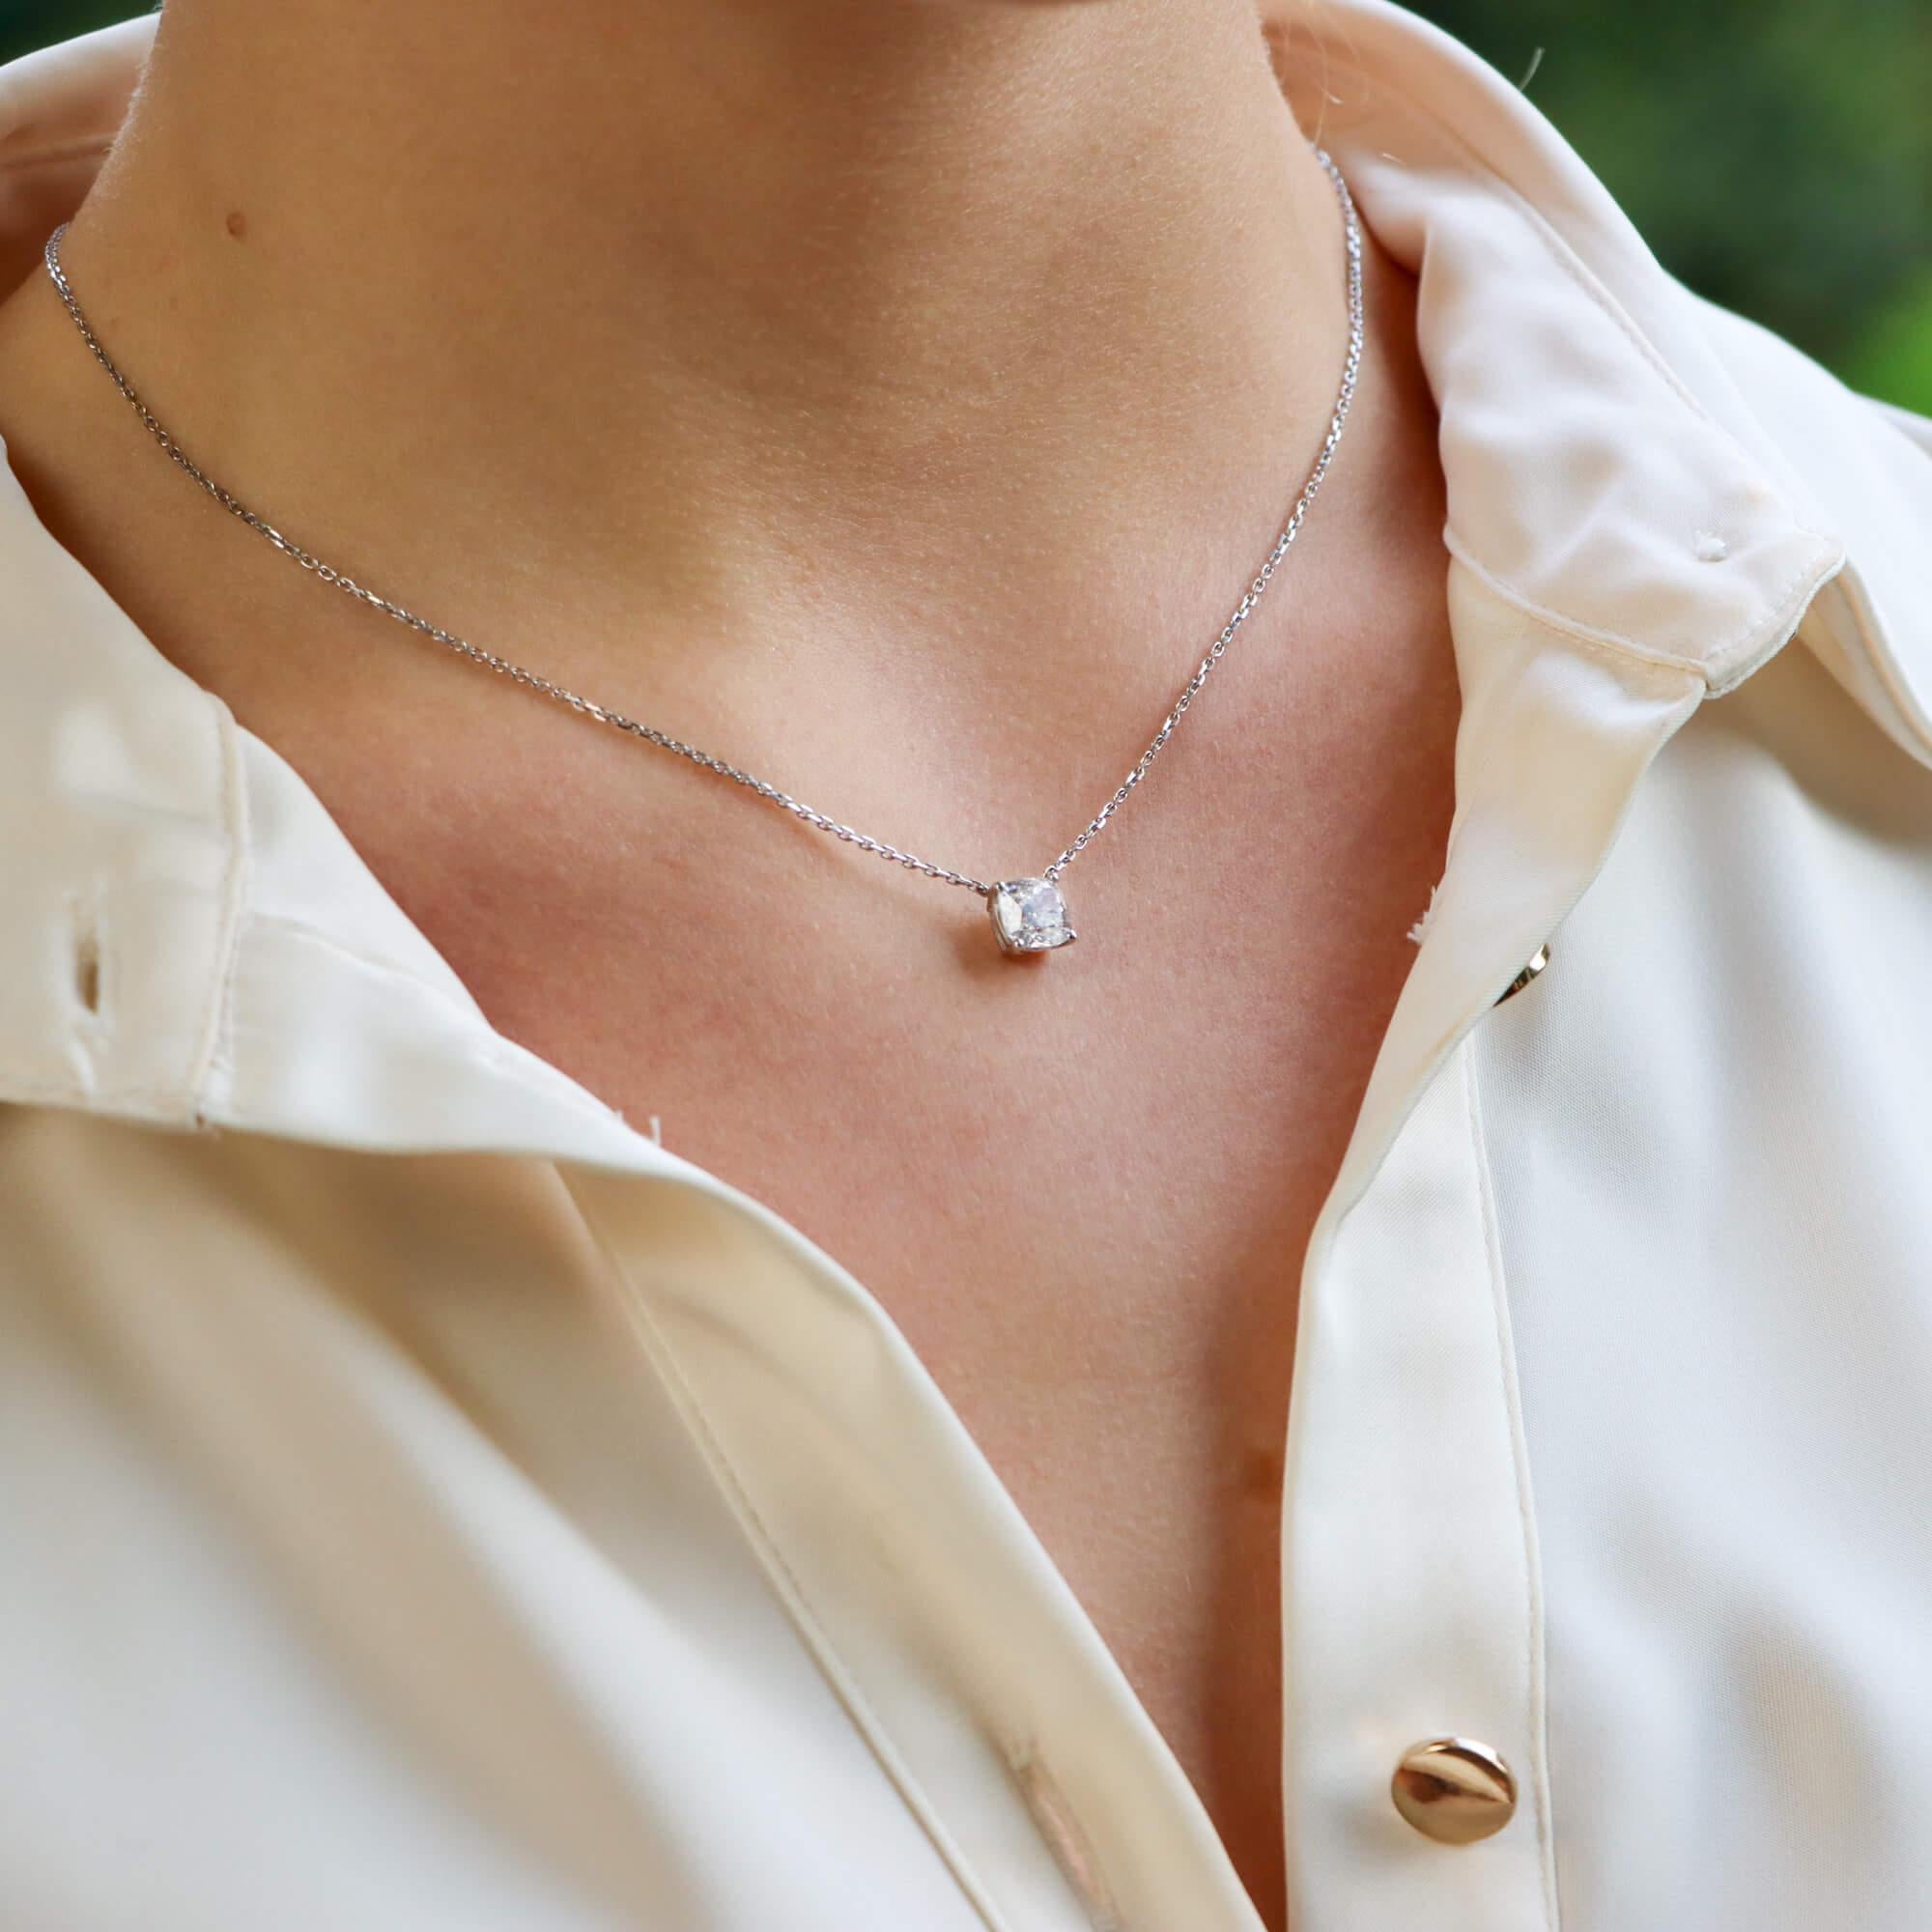 A beautiful solitaire cushion-cut diamond pendant necklace in 18-karat white gold. The pendant features a certified cushion brilliant-cut diamond which is claw-set in an open-back white gold setting. This stone has superb specifications being